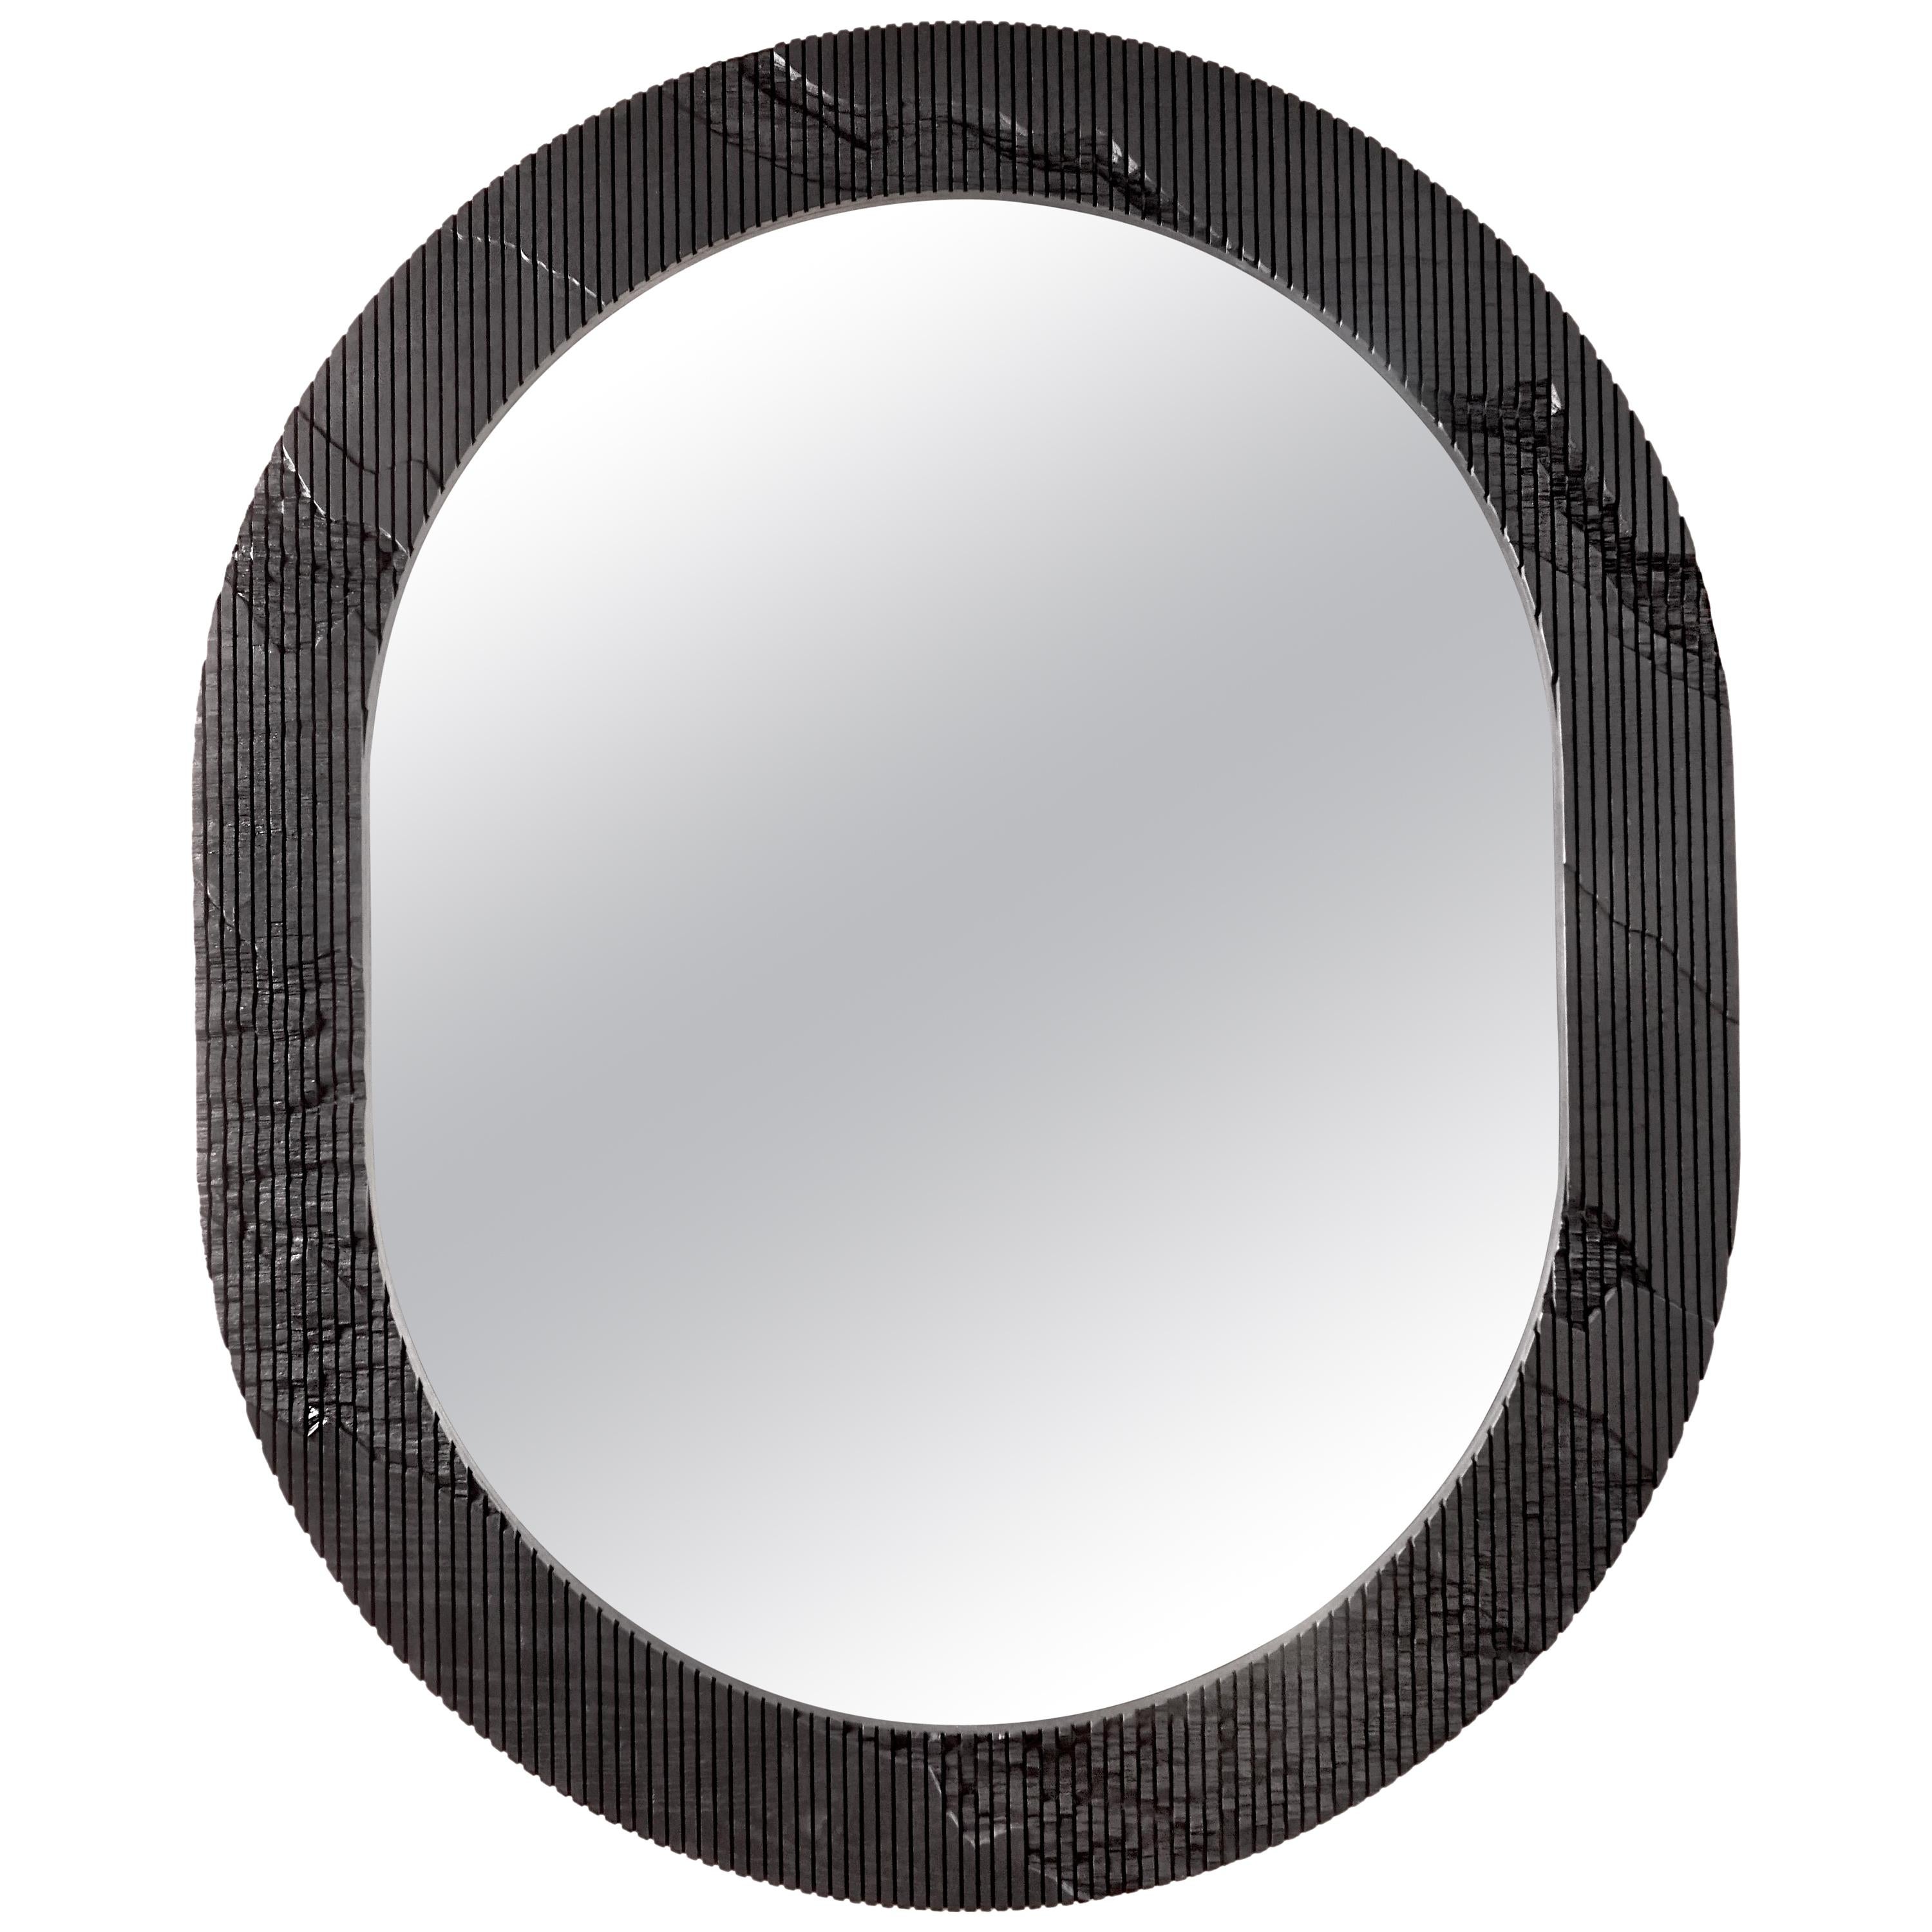 Shale Mirror in Black by Simon Johns